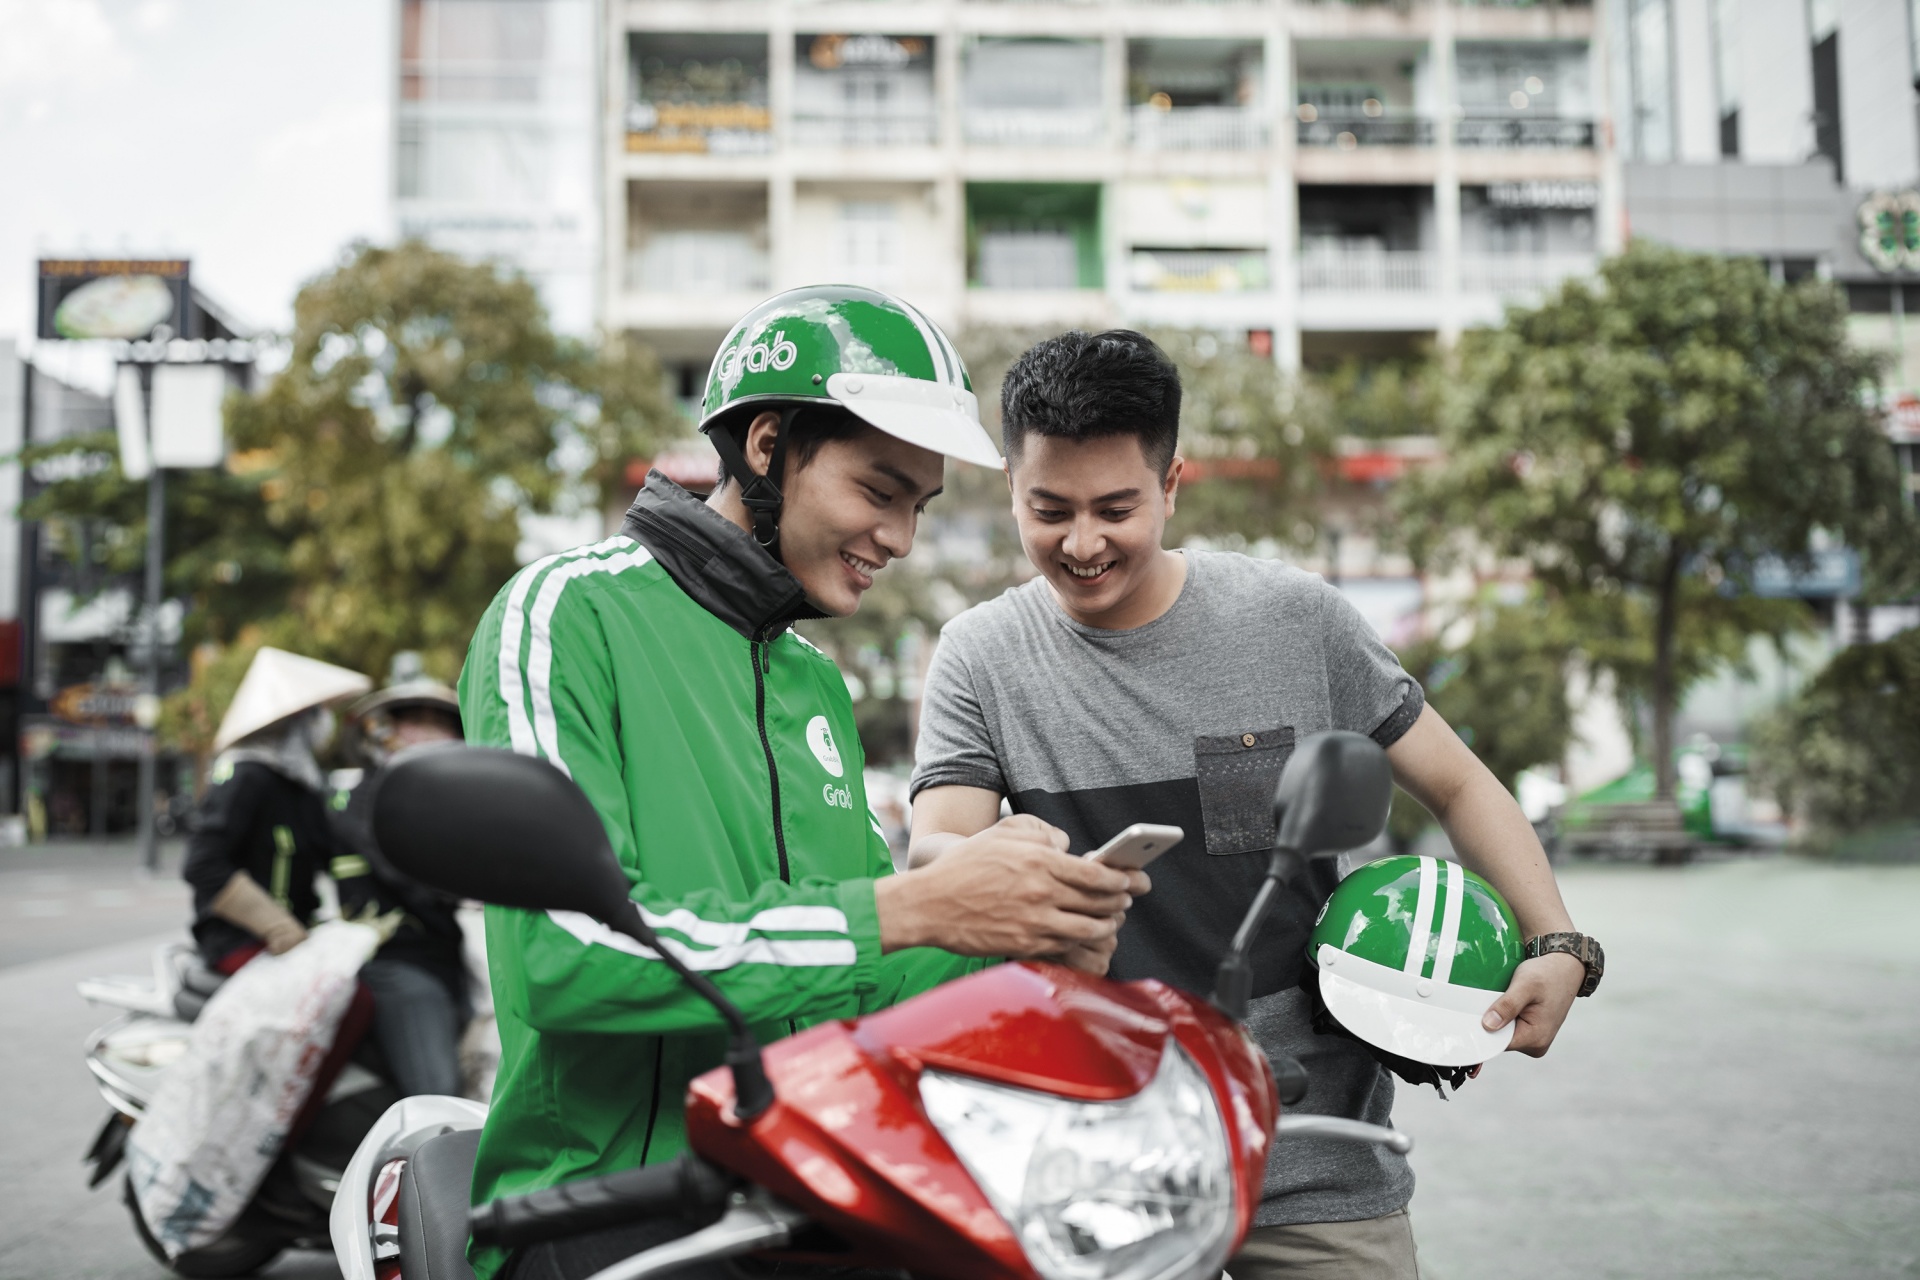 Insights from the road: Grab's immersive approach to product development